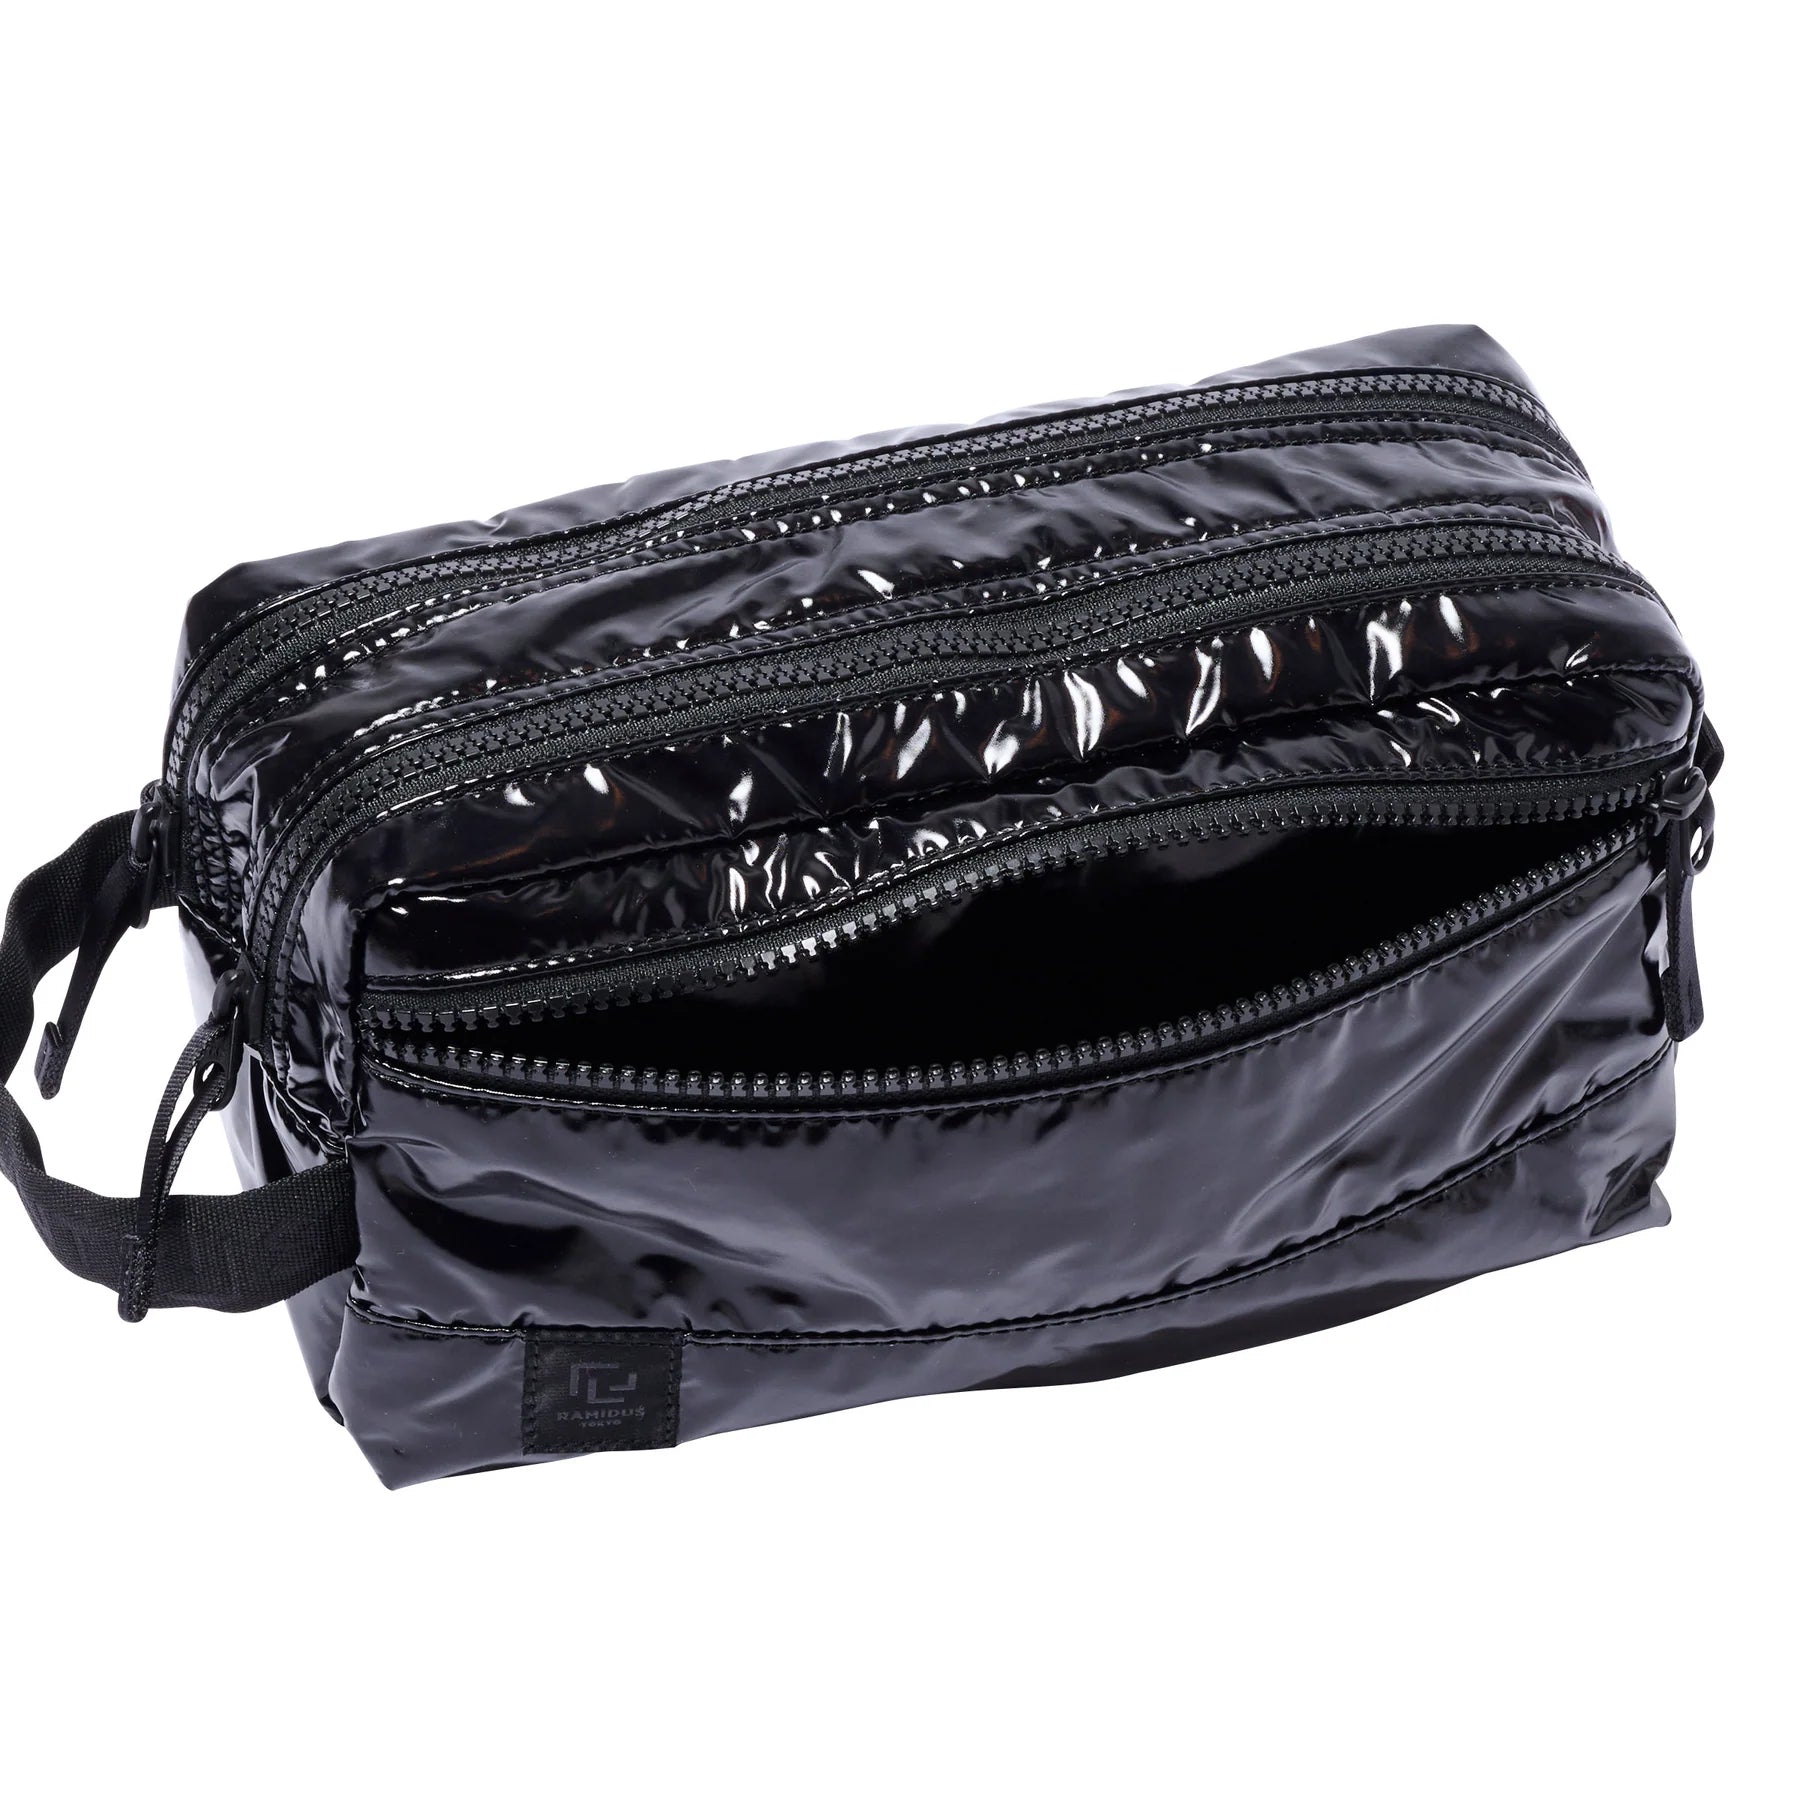 RAMIDUS / “MIRAGE” GROOMING POUCH (L)